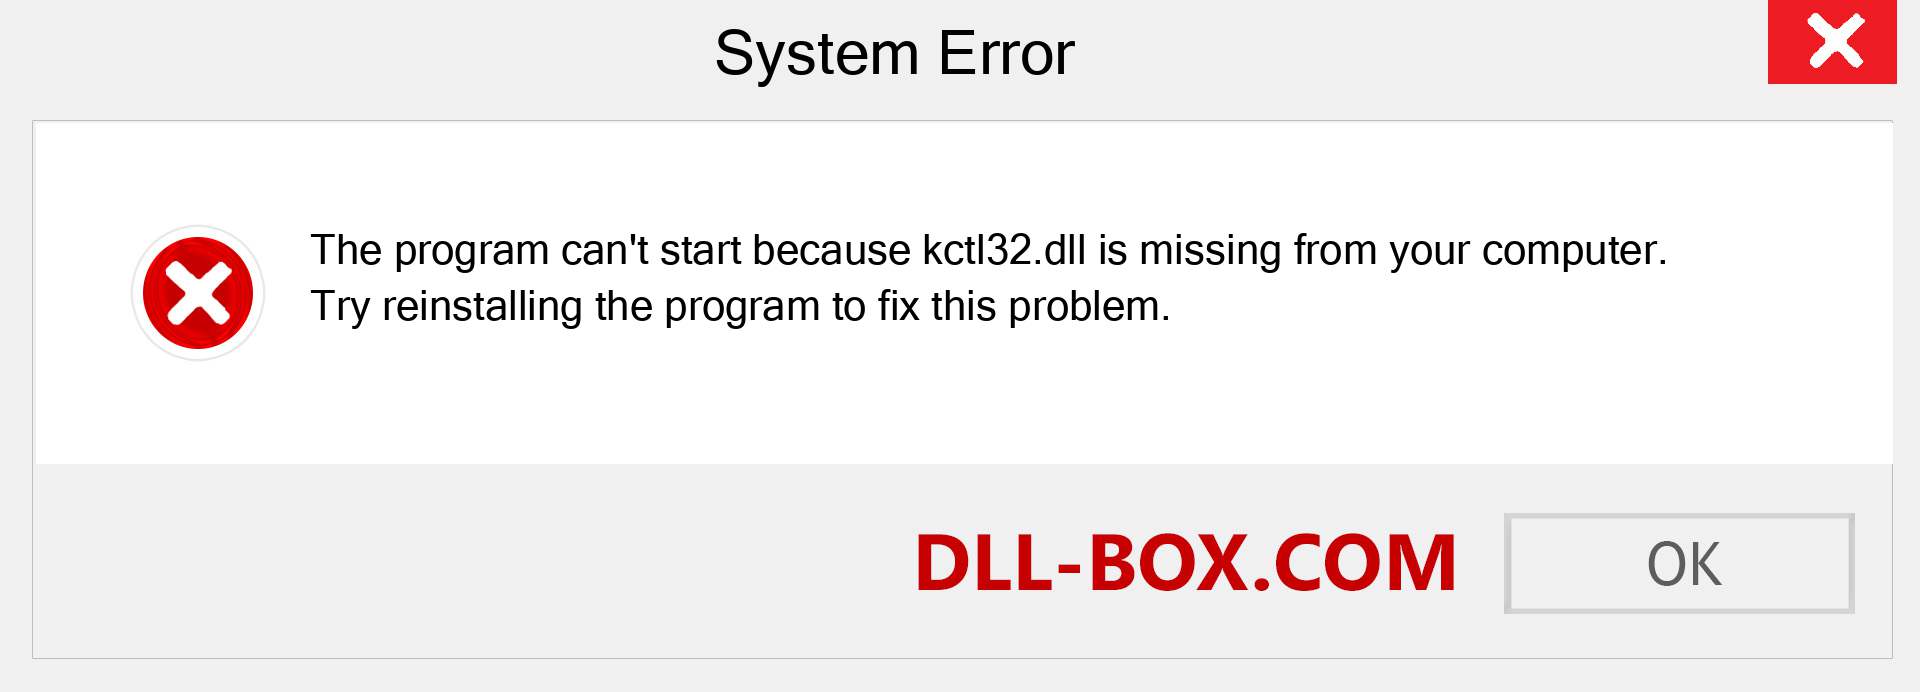  kctl32.dll file is missing?. Download for Windows 7, 8, 10 - Fix  kctl32 dll Missing Error on Windows, photos, images